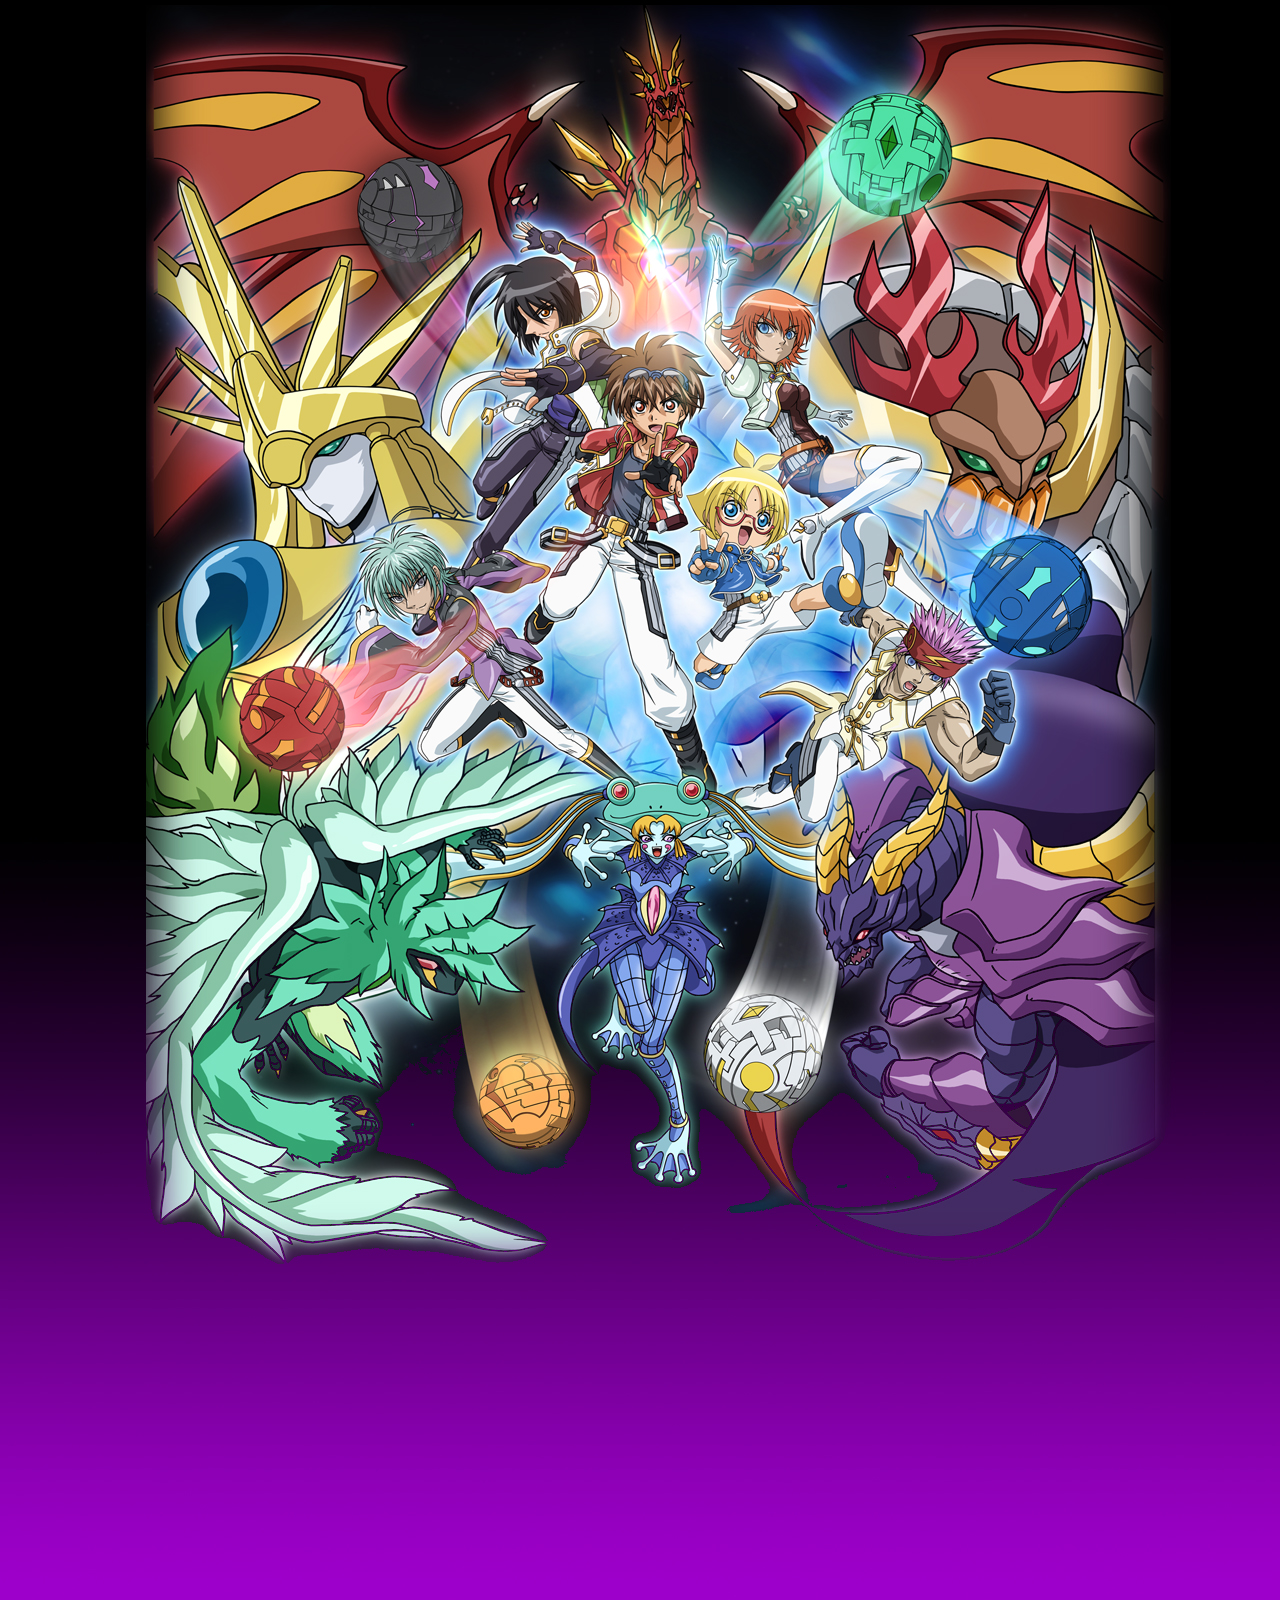 Armed Bakugan From 3d Art 288k Pc To Set The Image As